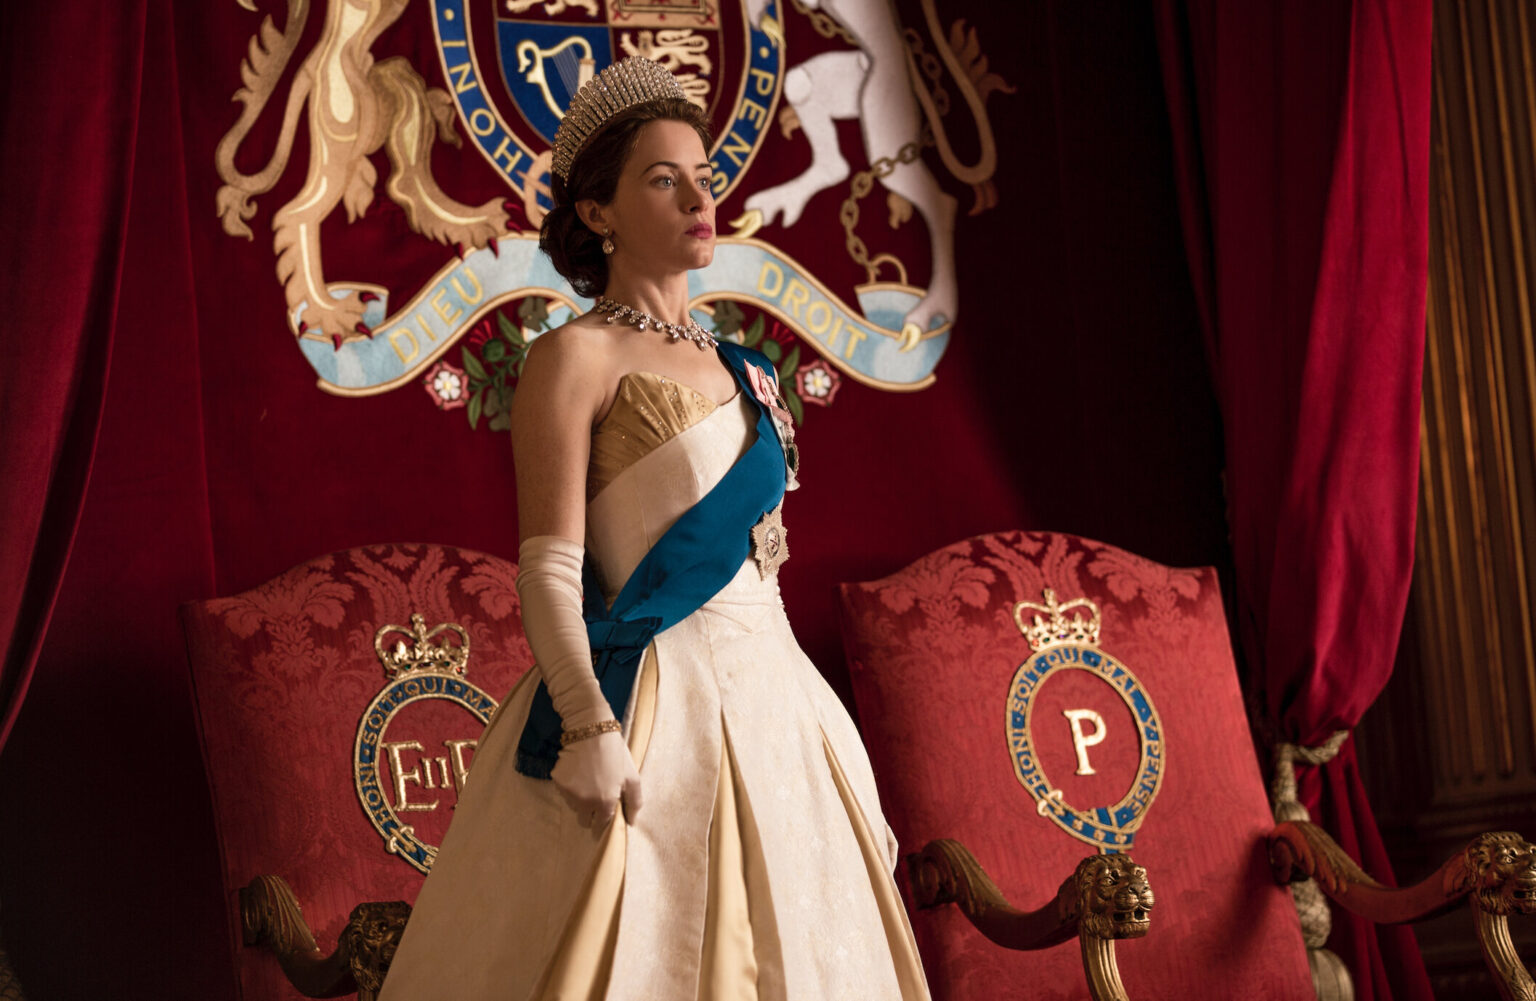 Historical fiction is a tricky genre. Should Netflix have a content warning for 'The Crown'? Learn more about the recent debates.